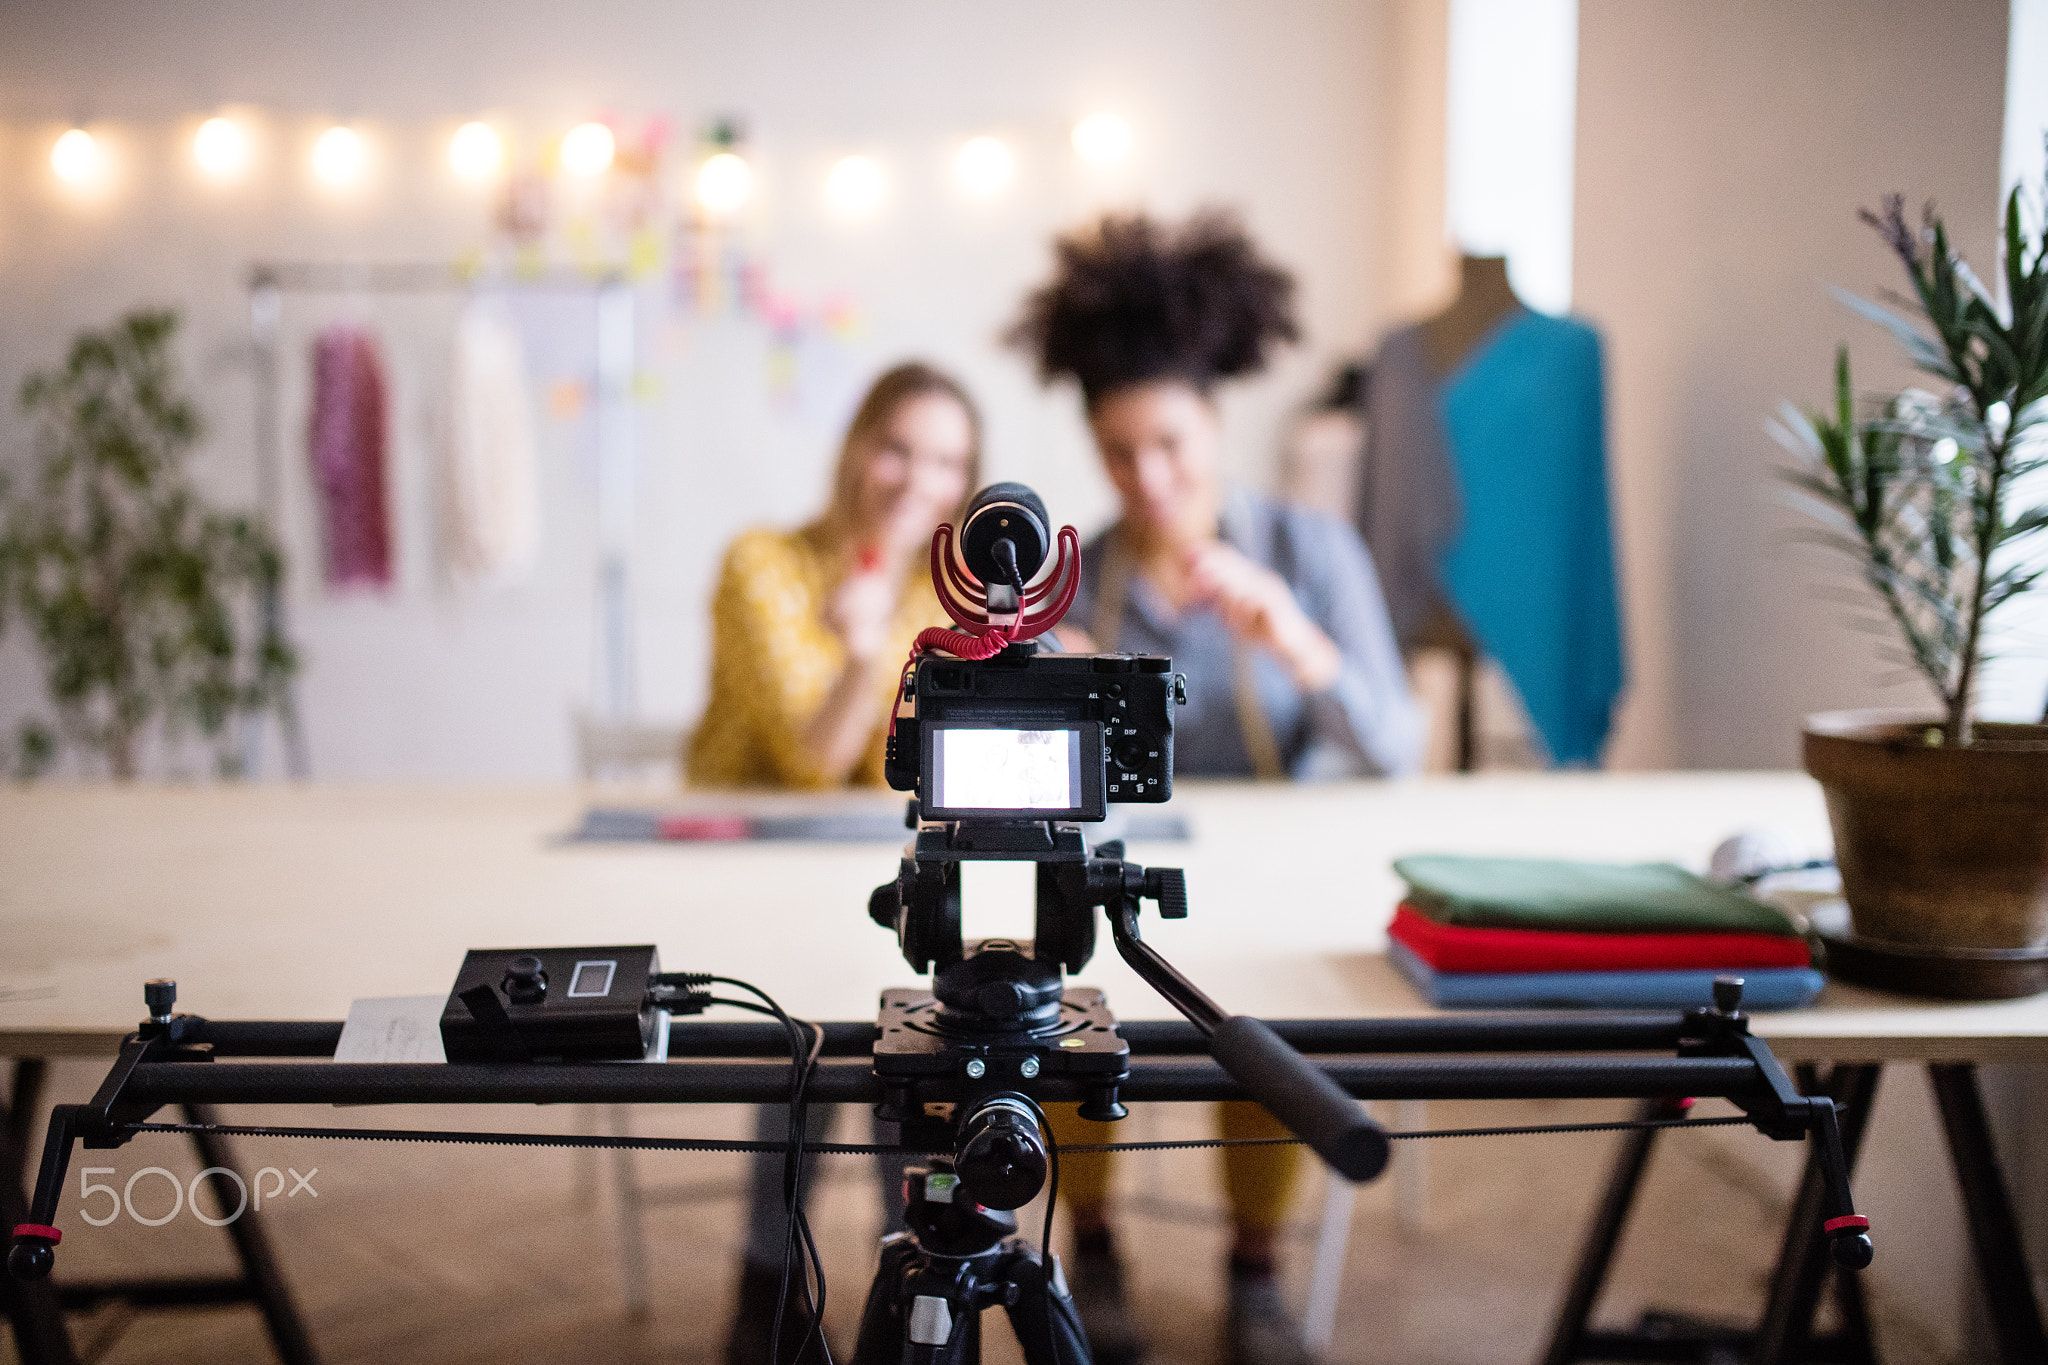 A camera and a slider with women in the background, startup business.